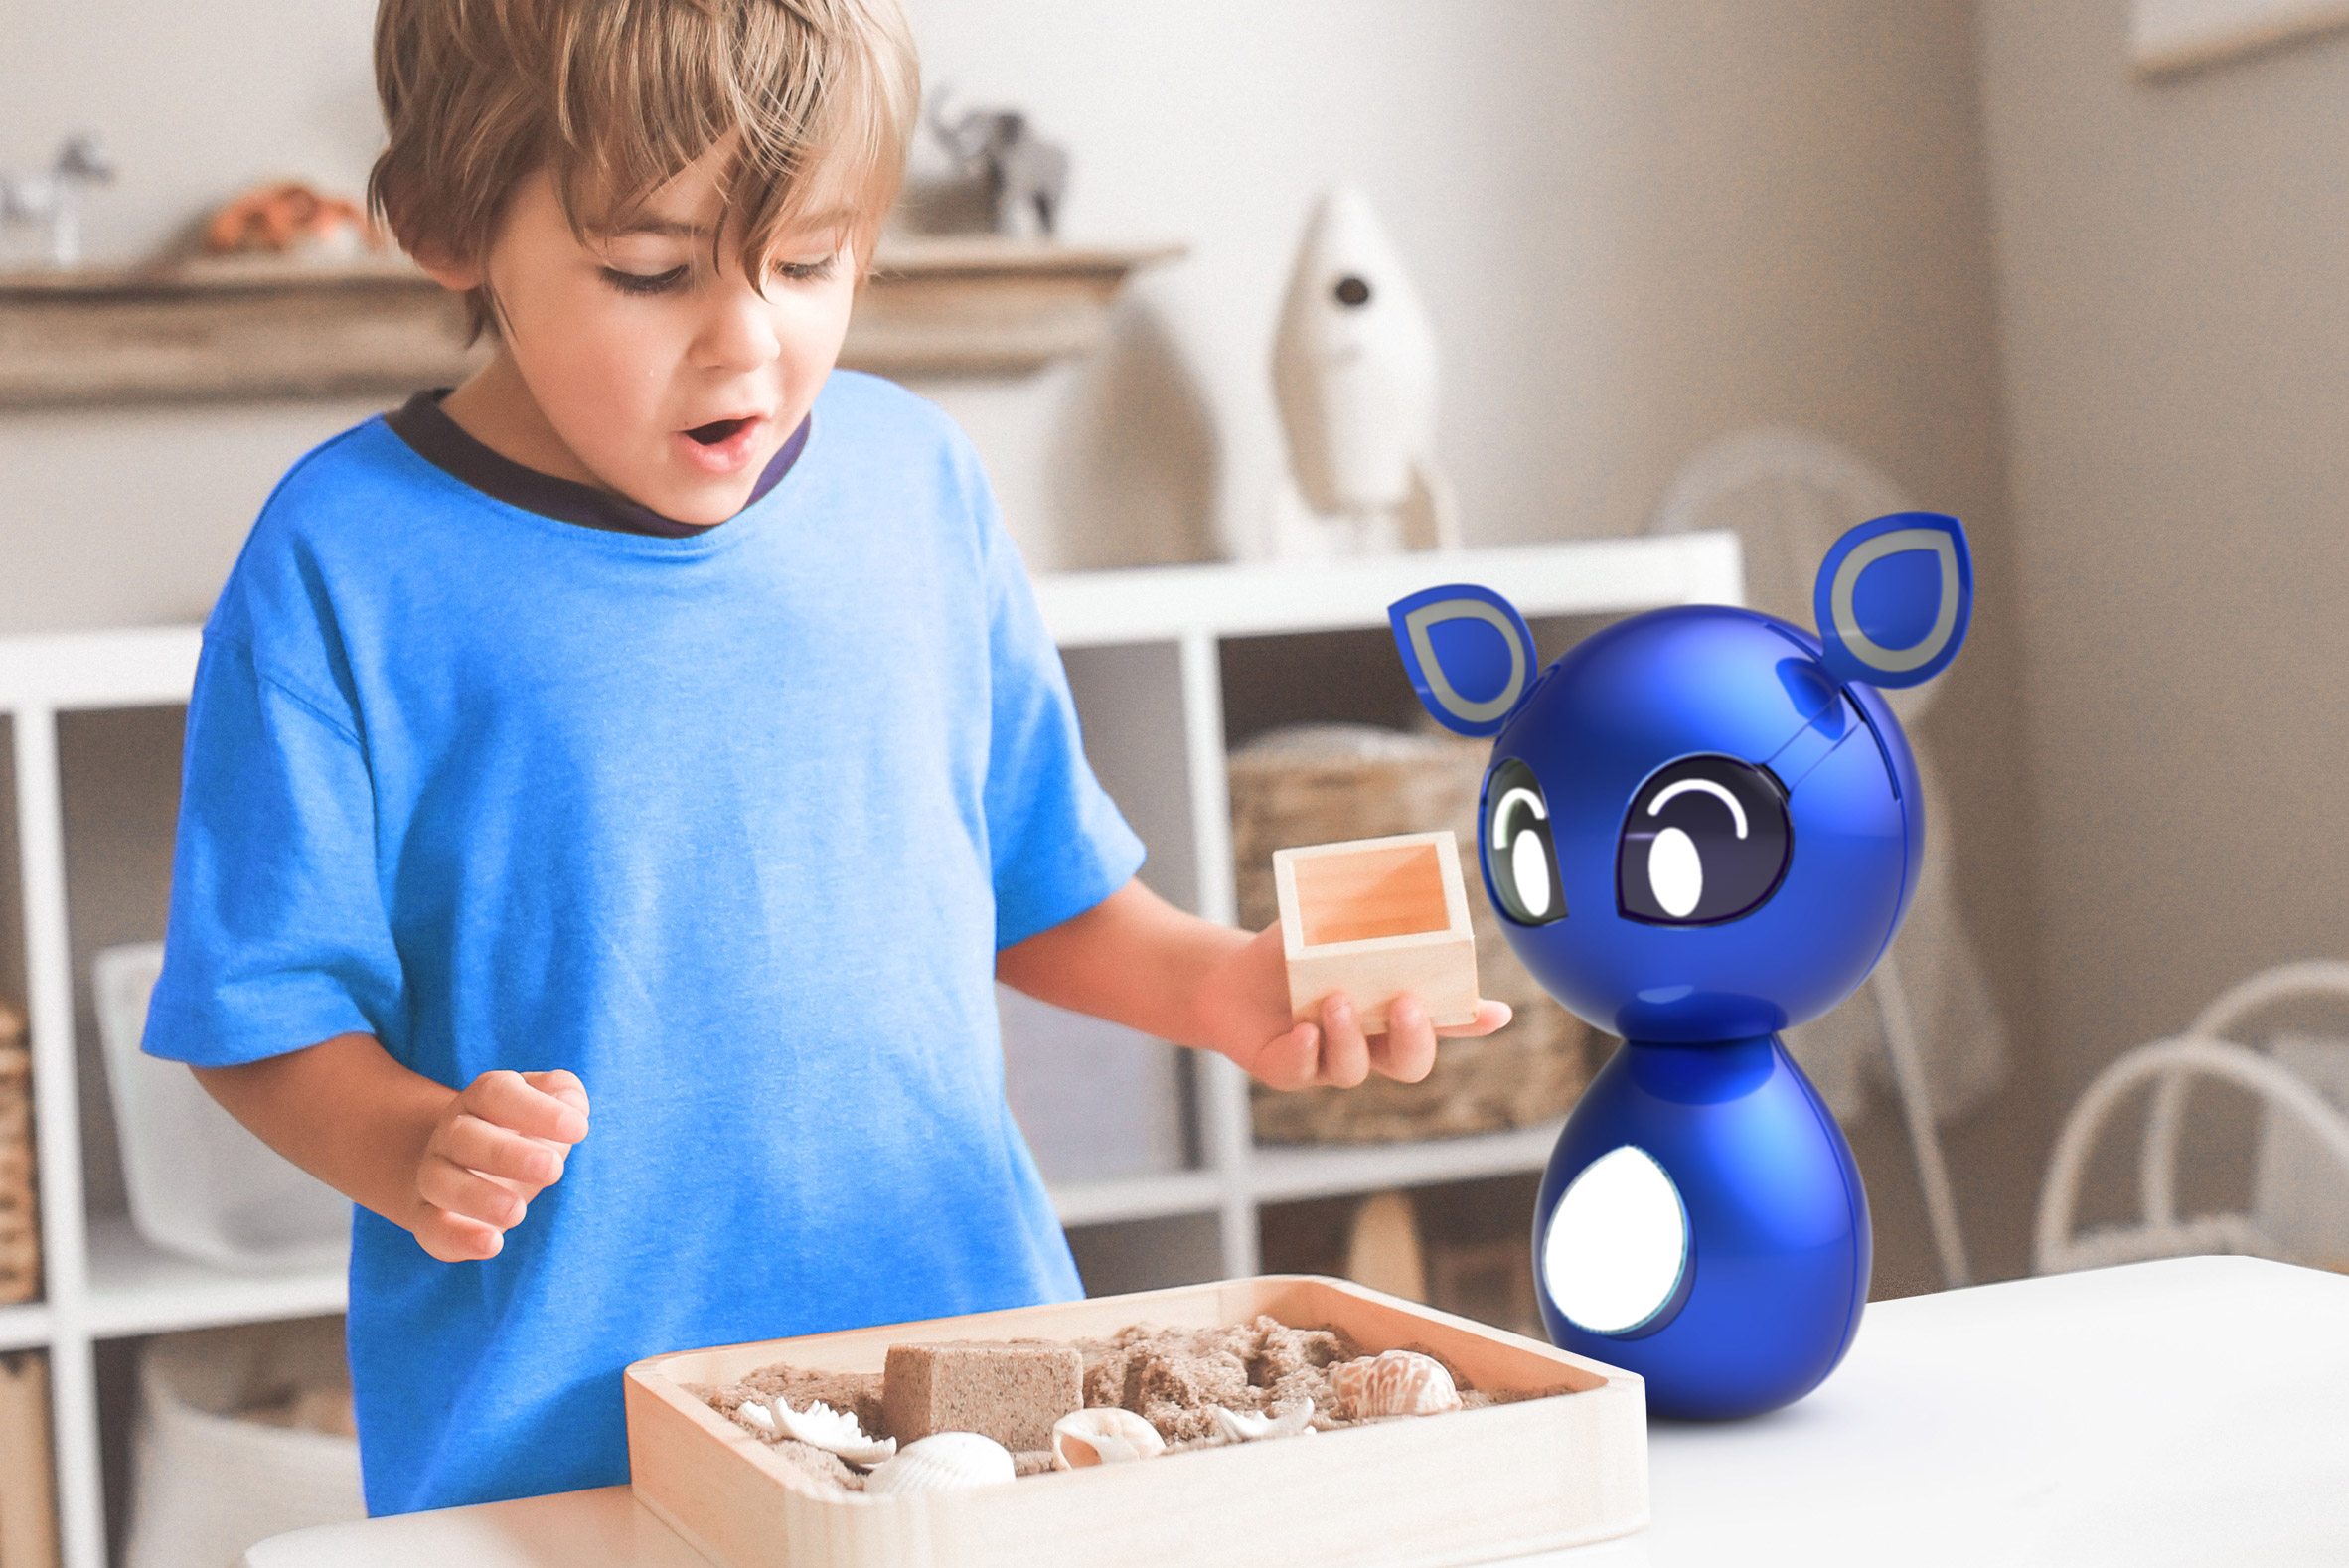 Child playing with blue bear-like creature